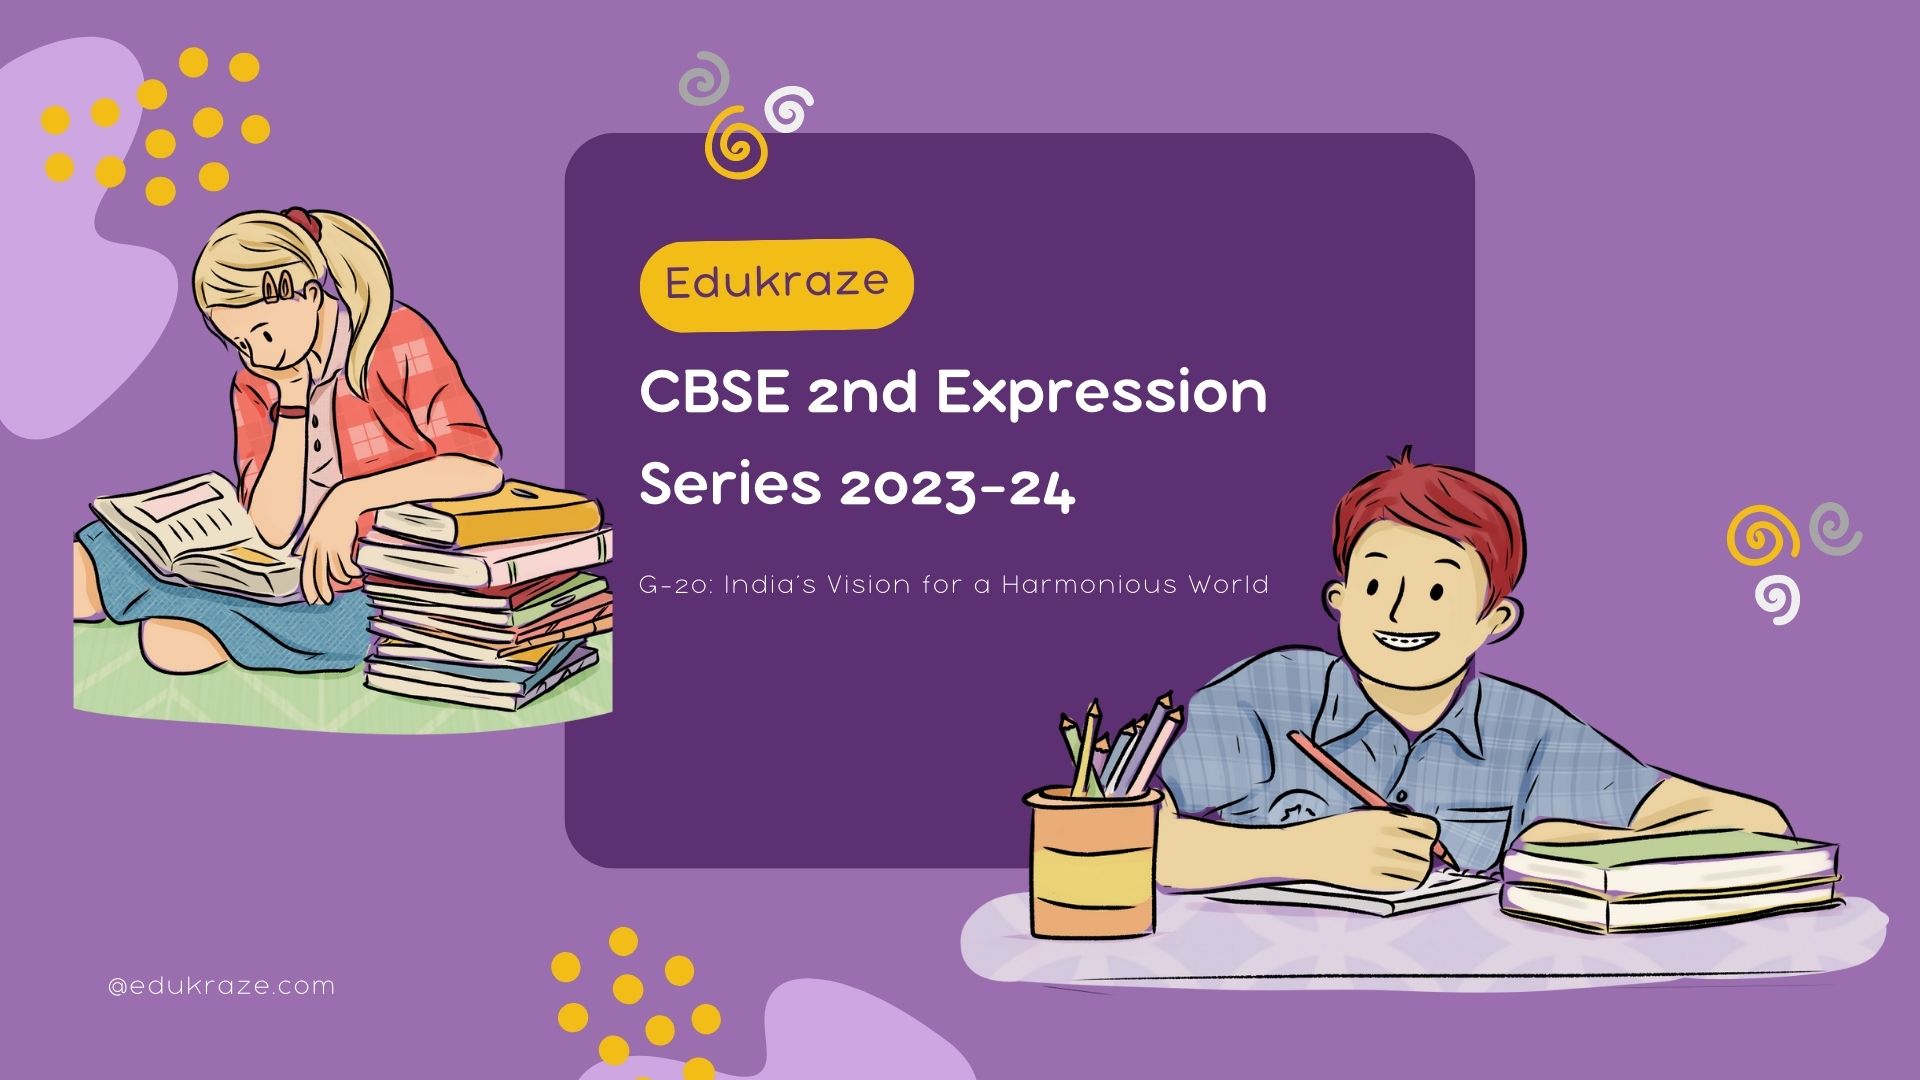 CBSE 2nd Expression Series 2023-24 on Theme of G-20: India's Vision for a Harmonious World